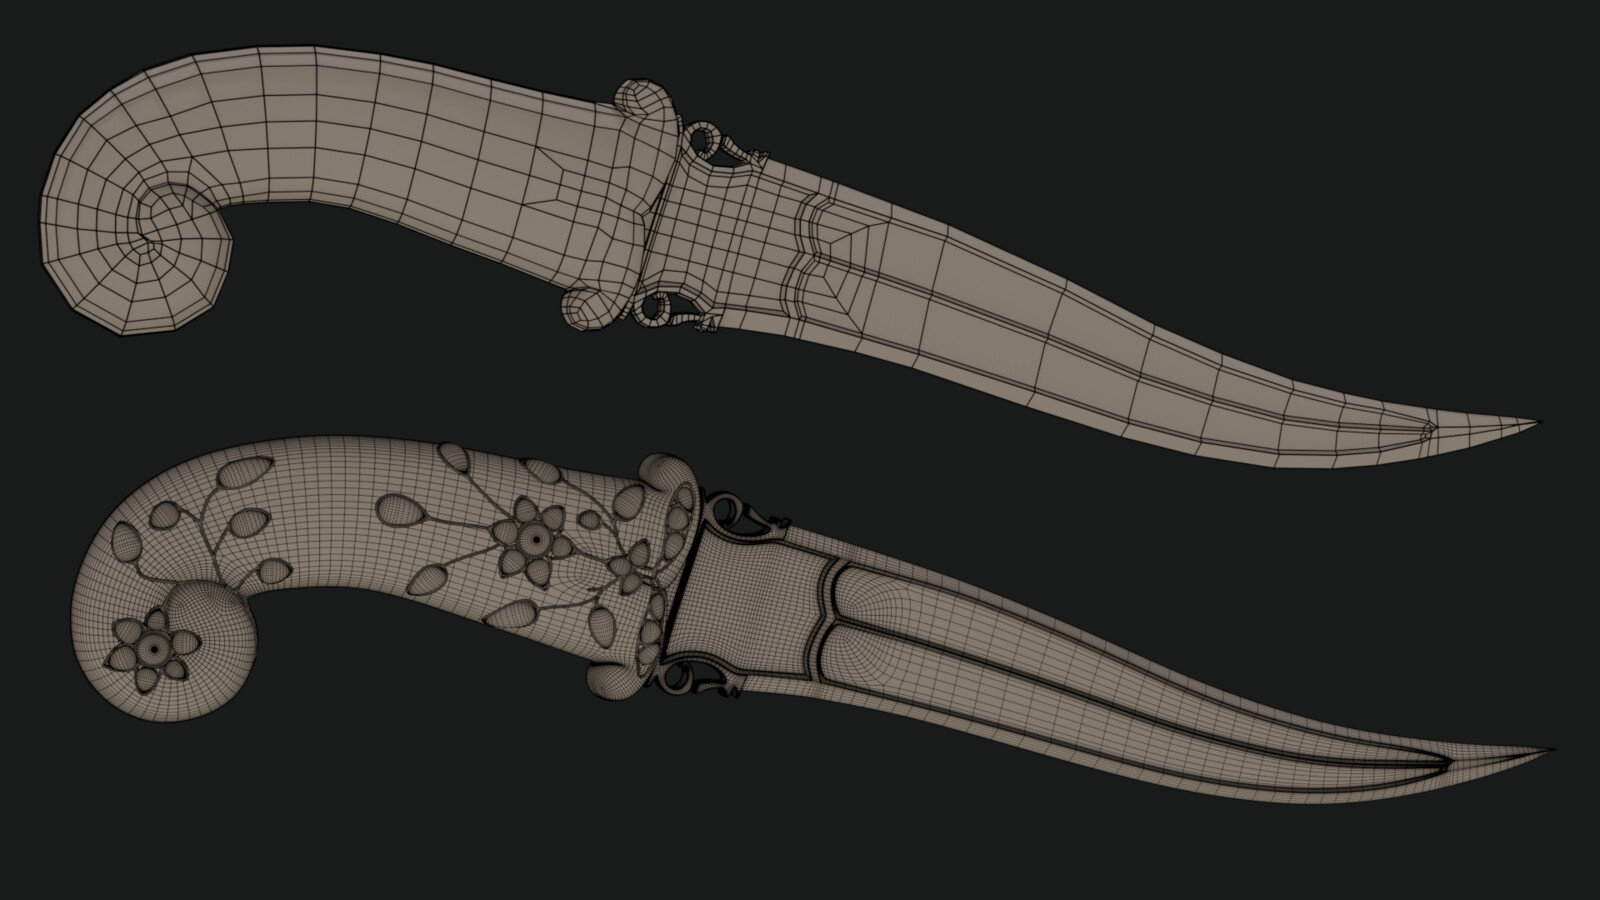 Dagger base design - wireframes.
The base version without subdivision or extra decoration in the hilt is 1900 tris. 